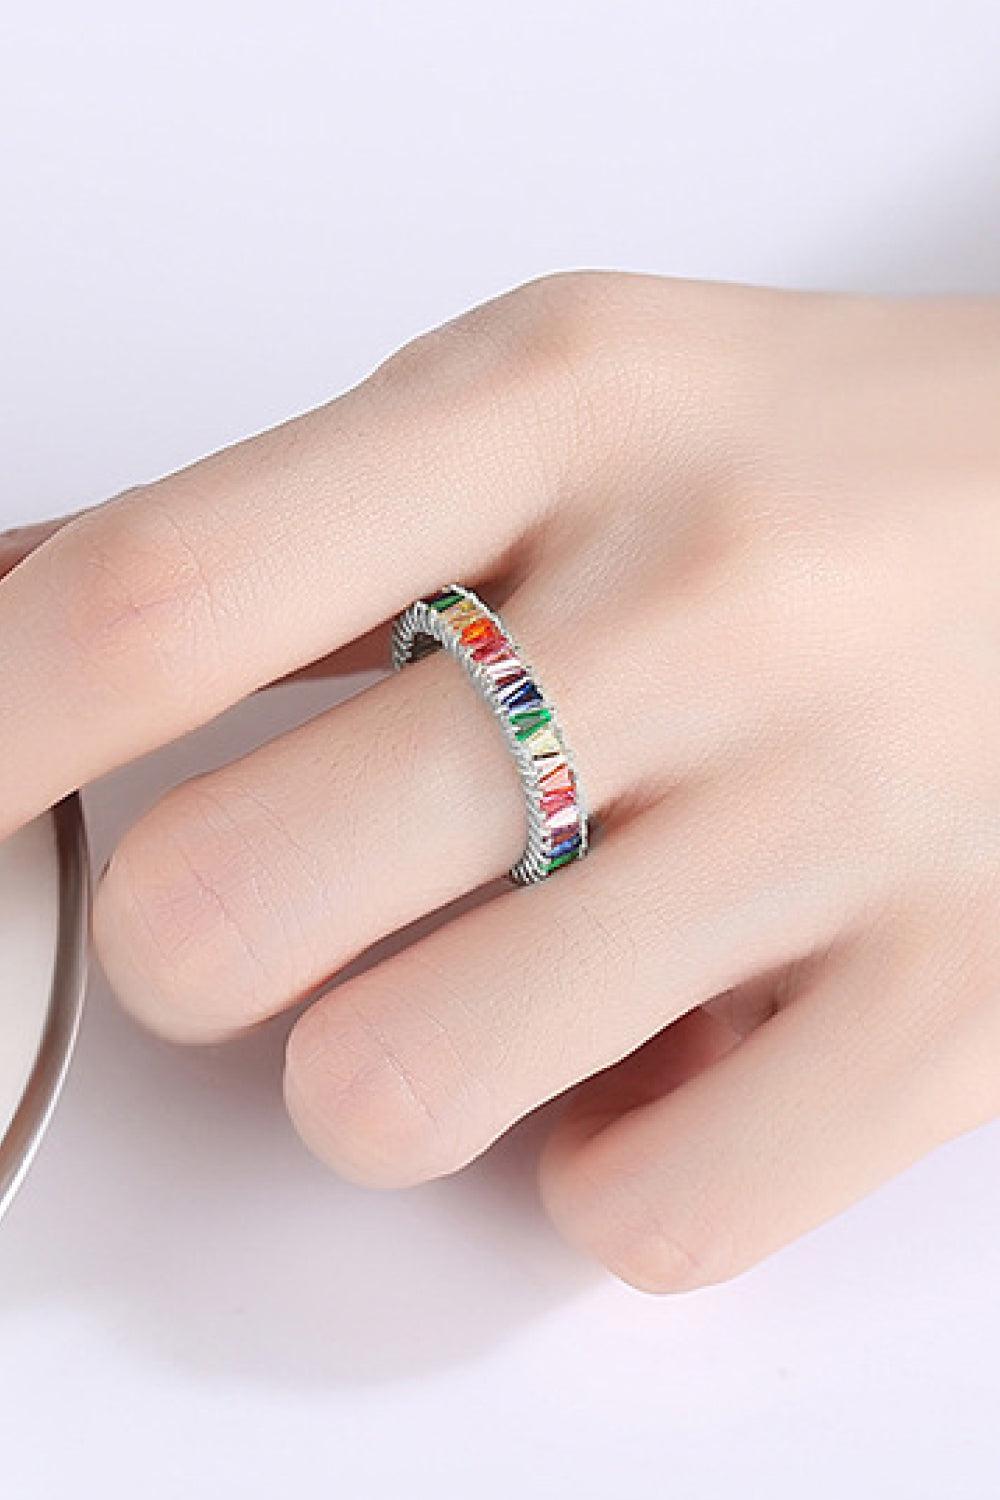 Multicolored Cubic Zirconia 925 Sterling Silver Ring BLUE ZONE PLANET